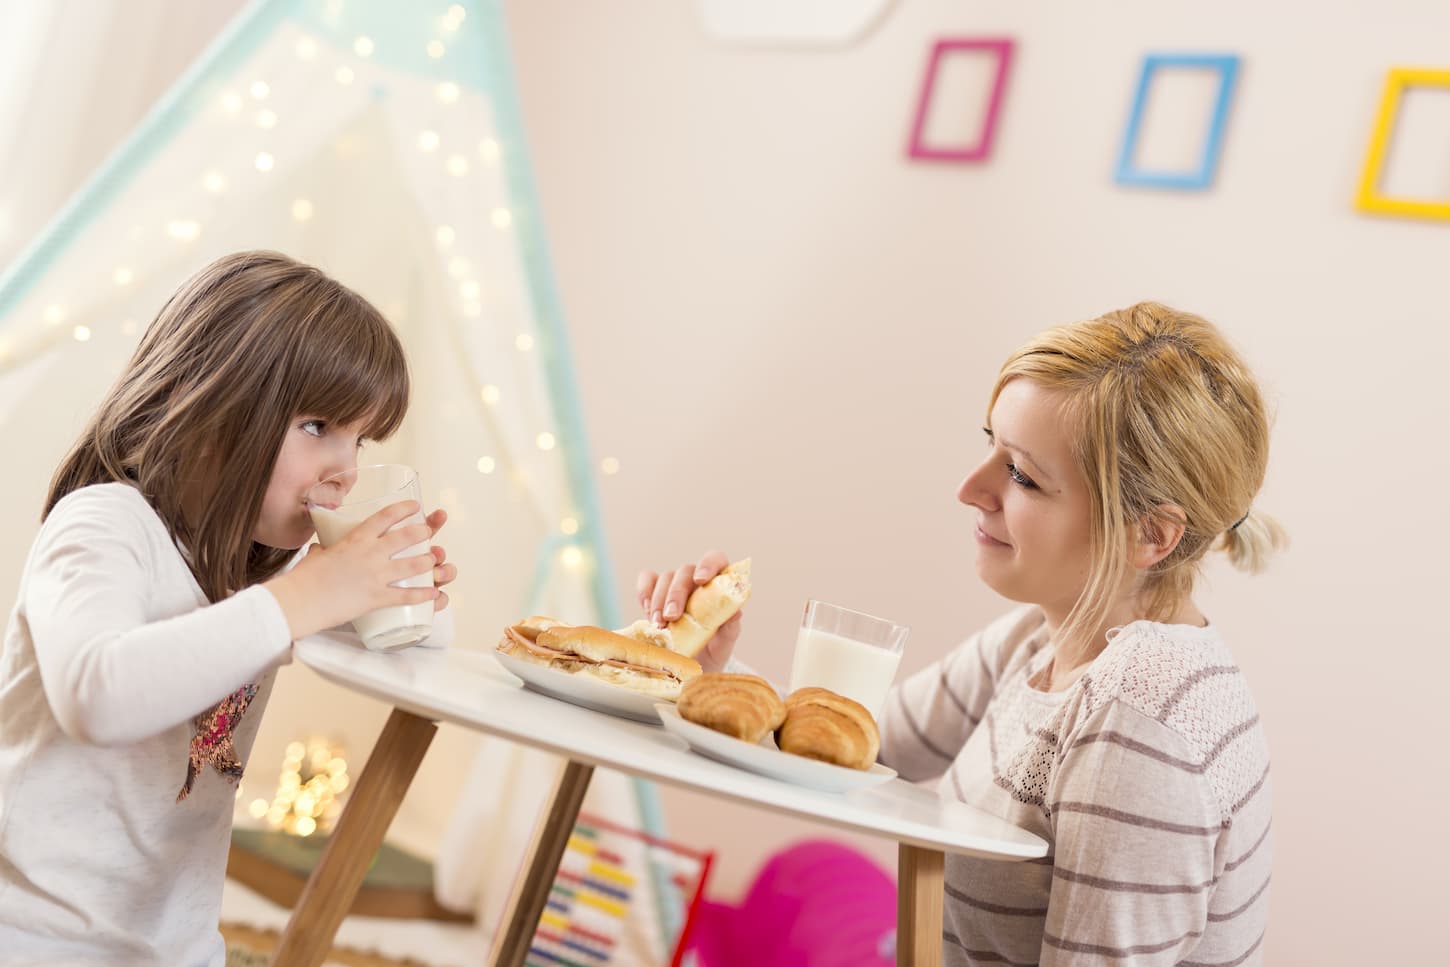 An image of a mother and her daughter having breakfast together.